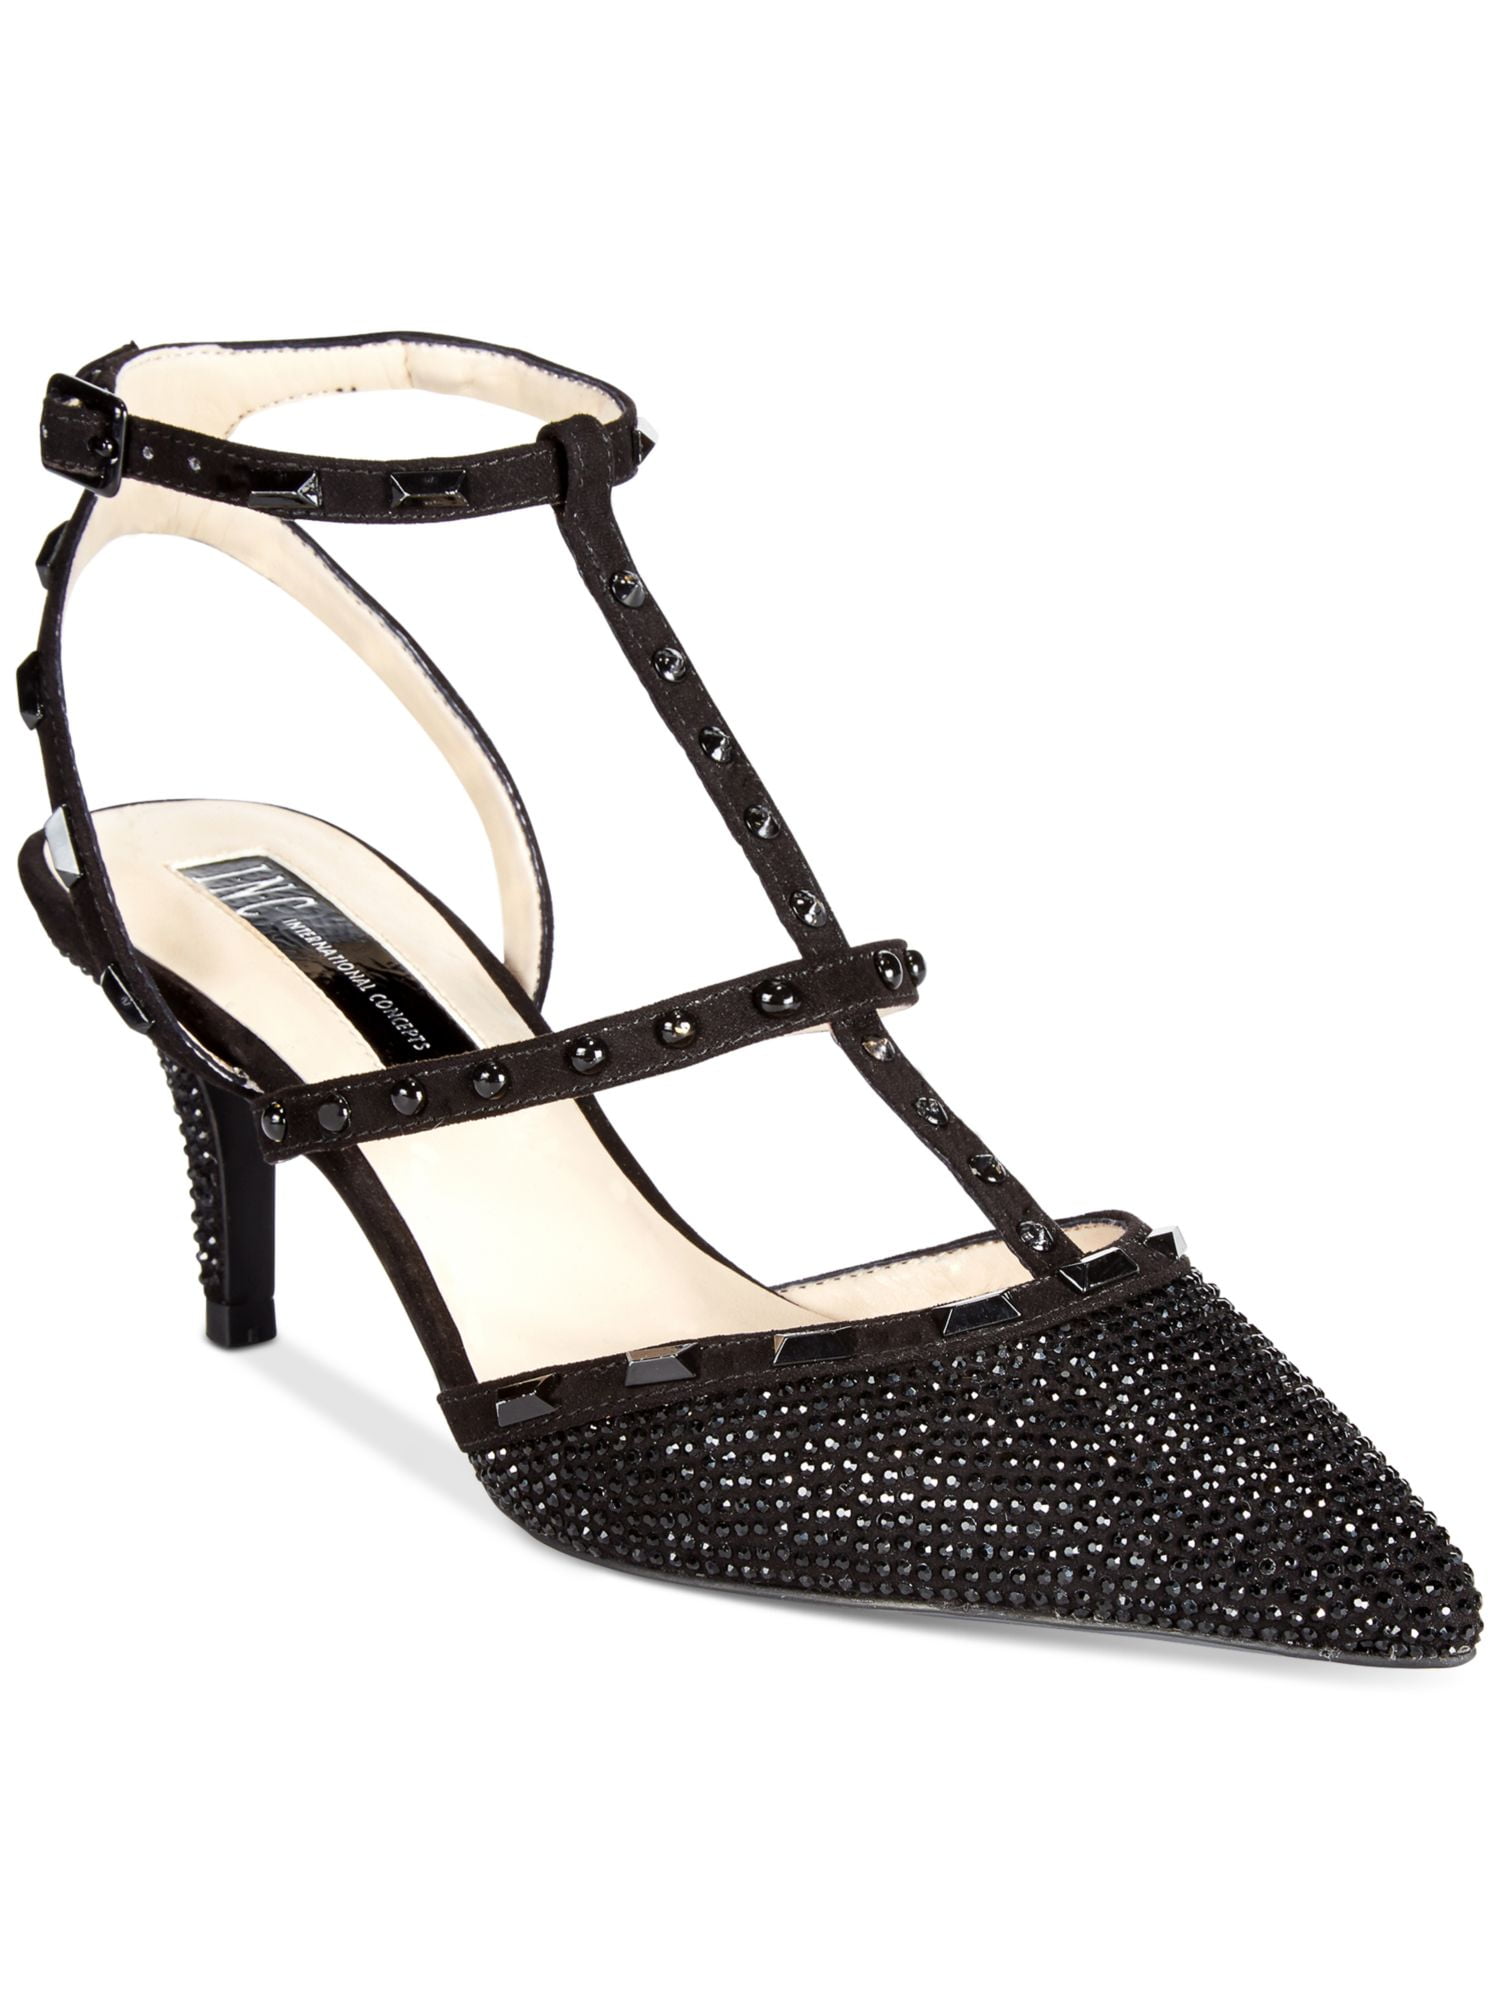 Riley 85 Studded Heel with Rebound | Kenneth Cole